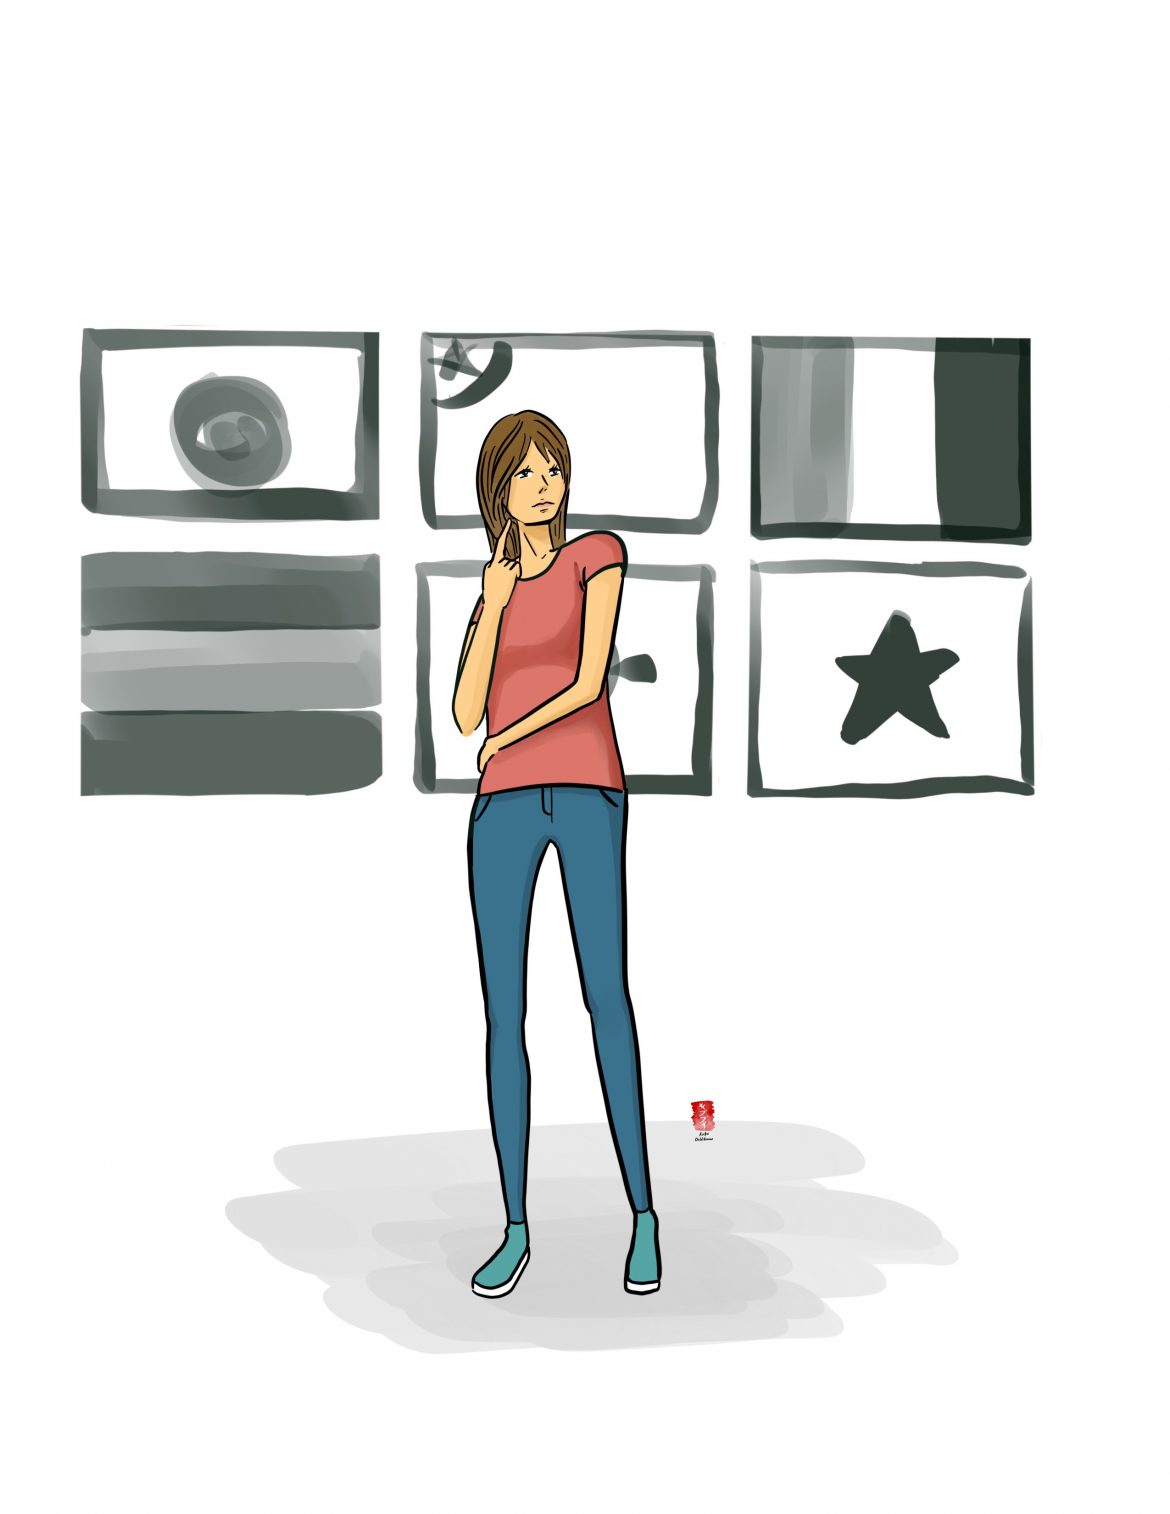 Illustration shows a woman standing in front of various countries flags